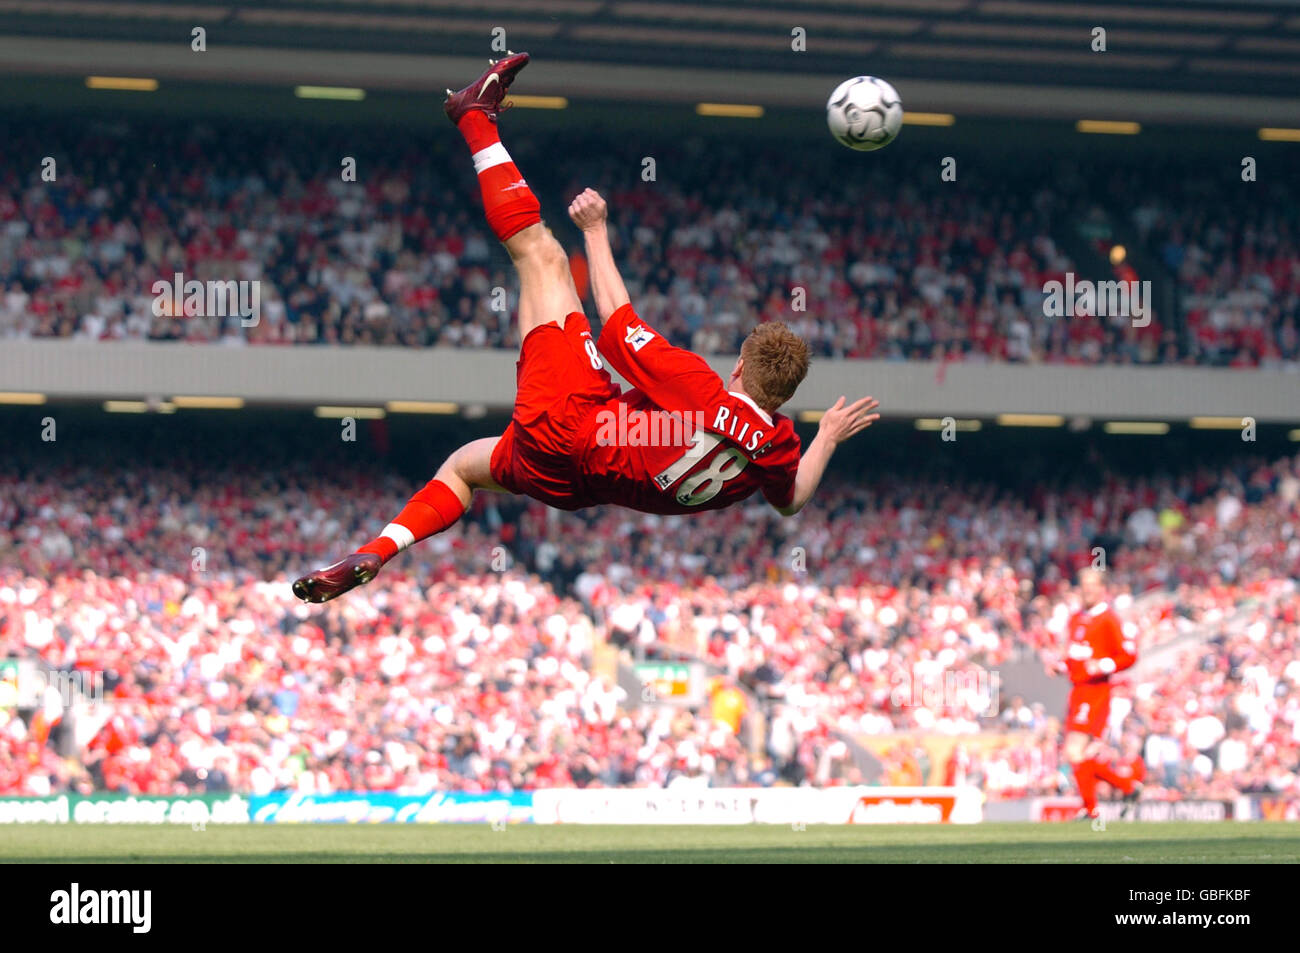 Soccer - FA Barclaycard Premiership - Liverpool v Middlesbrough. Liverpool's John Arne Riise attempts a spectacular overhead kick. Stock Photo